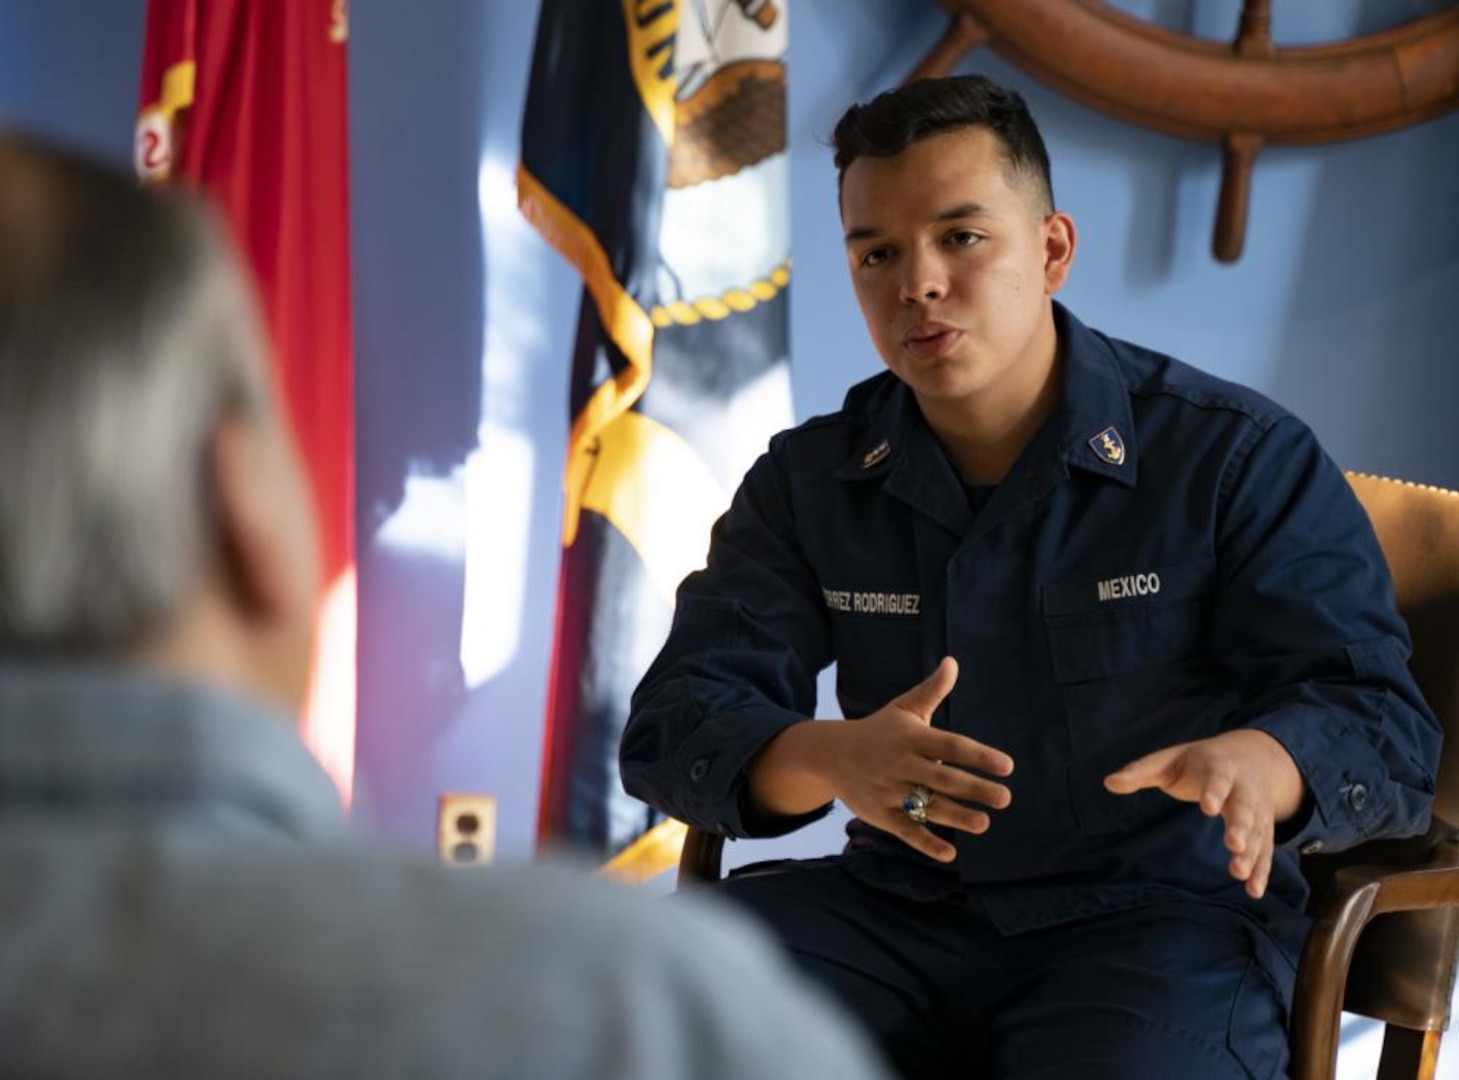 First Class Cadet Manuel Gutierrez Rodriguez, an international cadet at the United States Coast Guard Academy, participates in an interview on campus in New London, Conn., March 21, 2022. Rodriguez will be returning to his home nation of Mexico after commissioning with the Class of 2022, which has the highest number of international students in history. (U.S. Coast Guard photograph by Petty Officer 3rd Class Matthew Thieme)